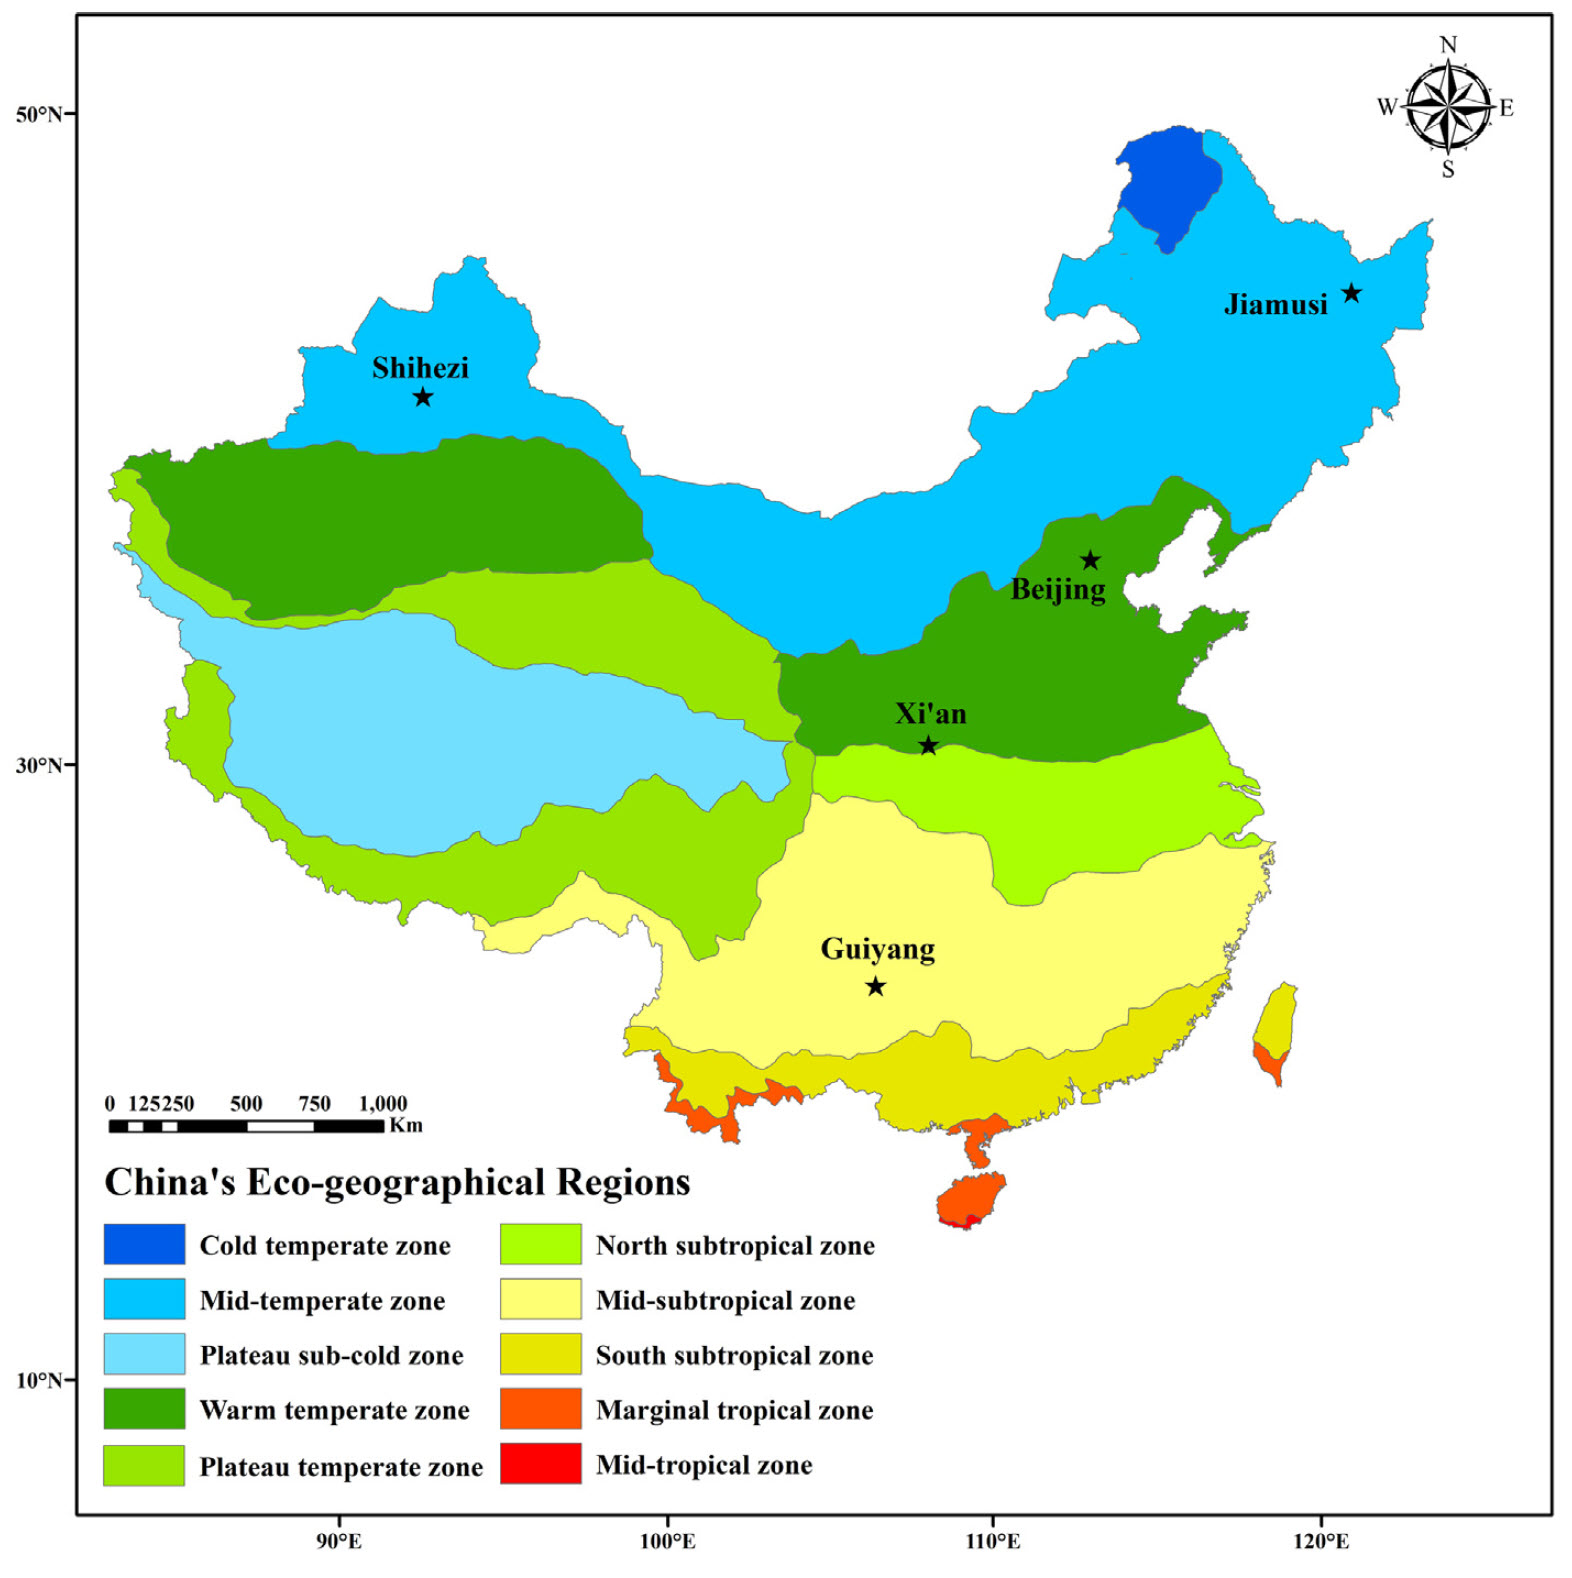 Study locations in China used to study phenology responses to temperature across a temperature gradient (Guo et al., 2015a)